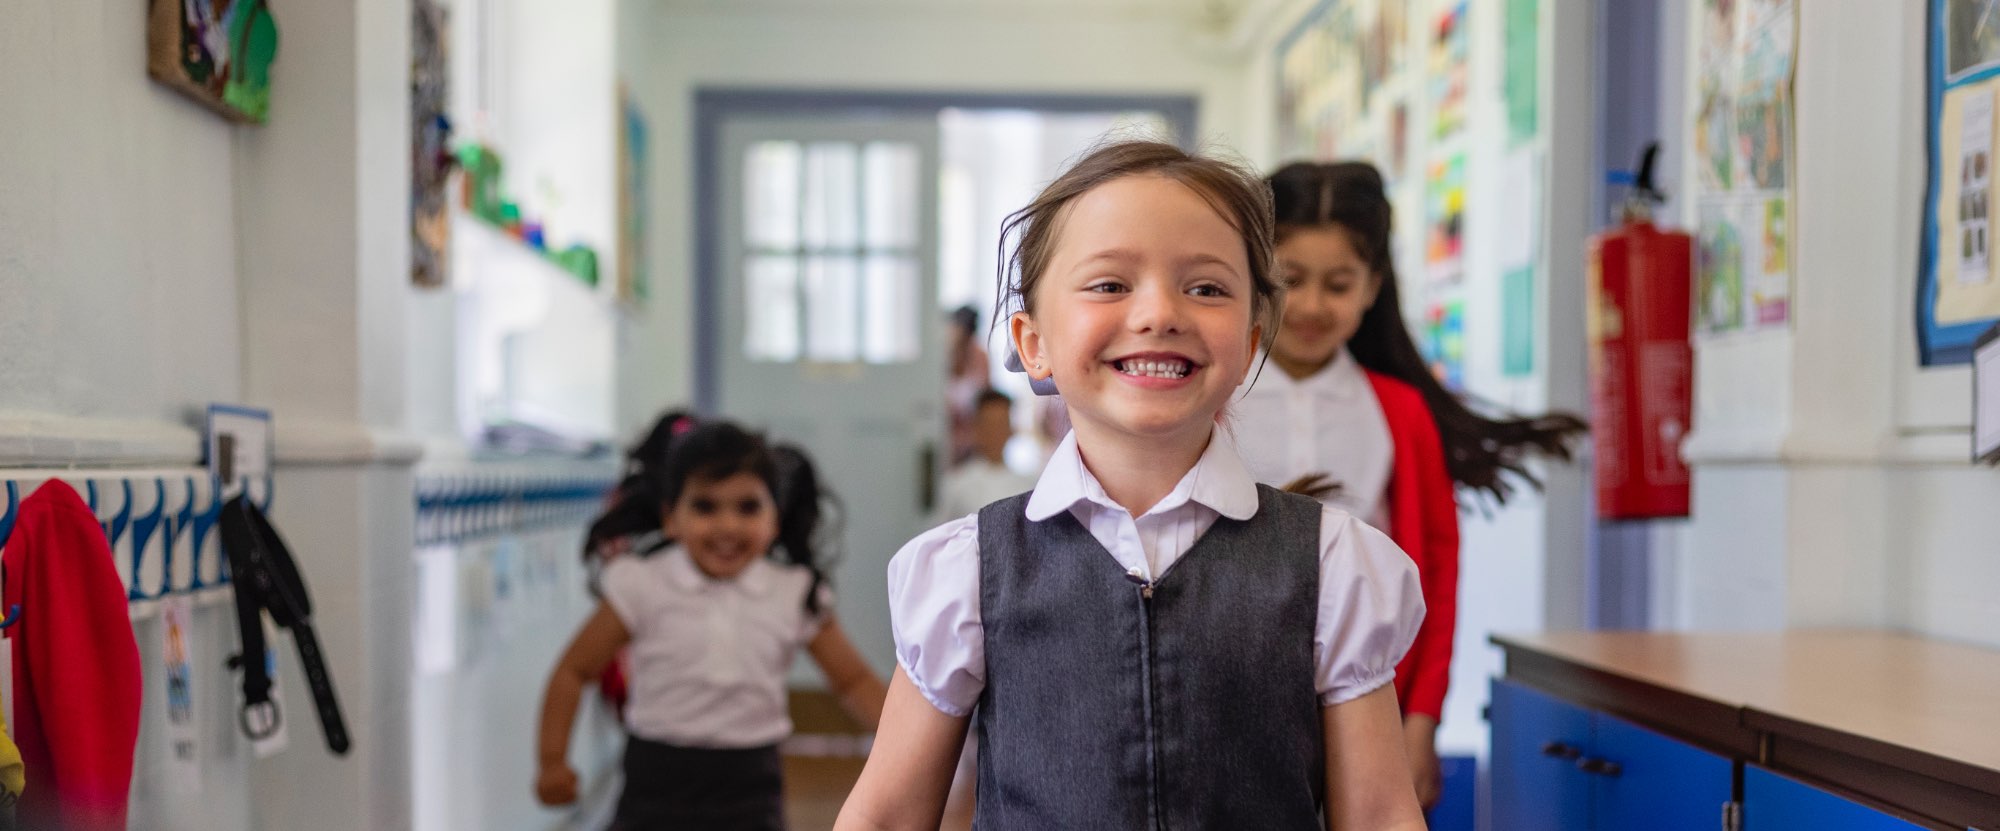 Primary school children in a school corridor, smiling. The girl in front is wearing a white shirt and a grey dress.